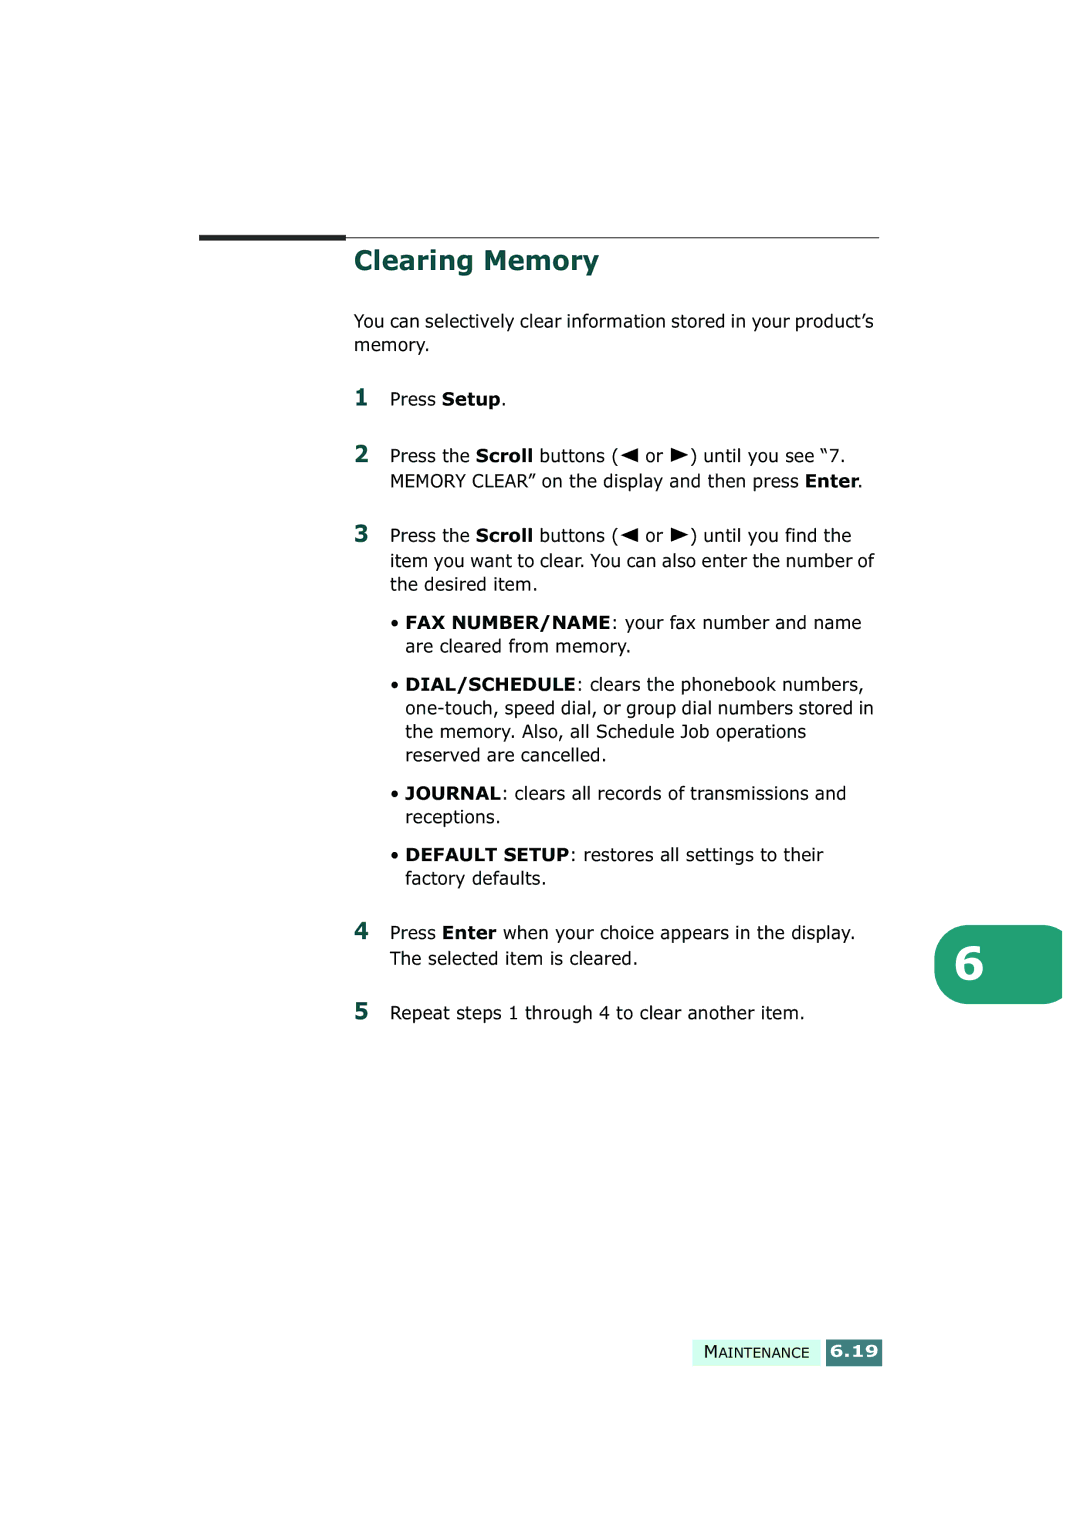 Samsung SF-430 manual Clearing Memory, Repeat steps 1 through 4 to clear another item 